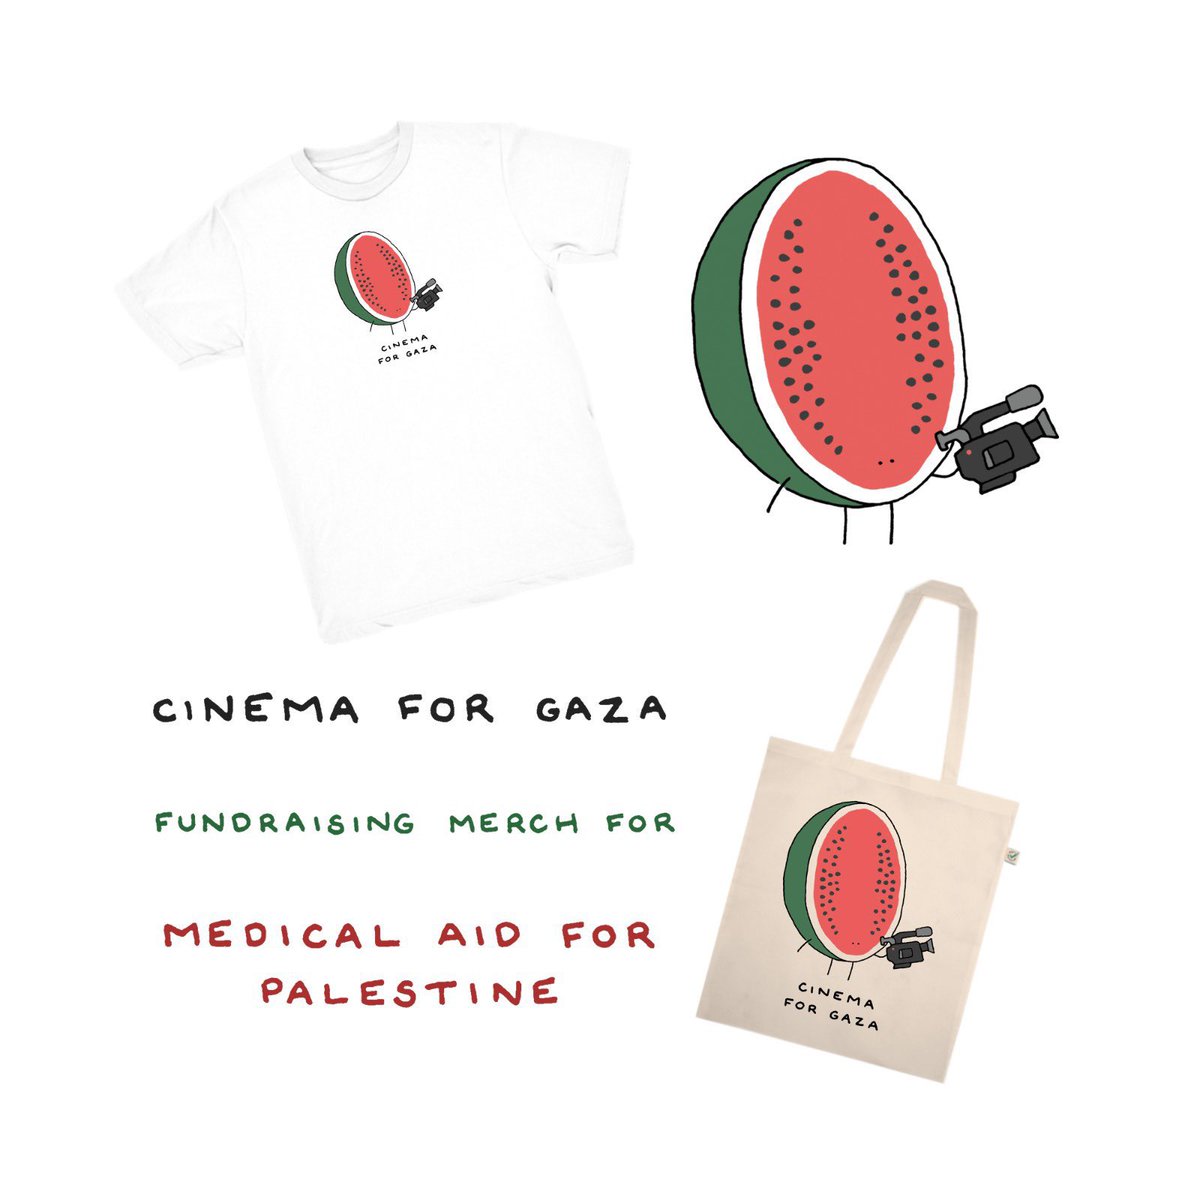 There are 5 days left to purchase a t-shirt or tote bag from the team behind the @Cinema4Gaza auction. Proceeds will go toward essential medical aid in Gaza. Purchase here: weareprintsocial.com/cinema-for-gaza